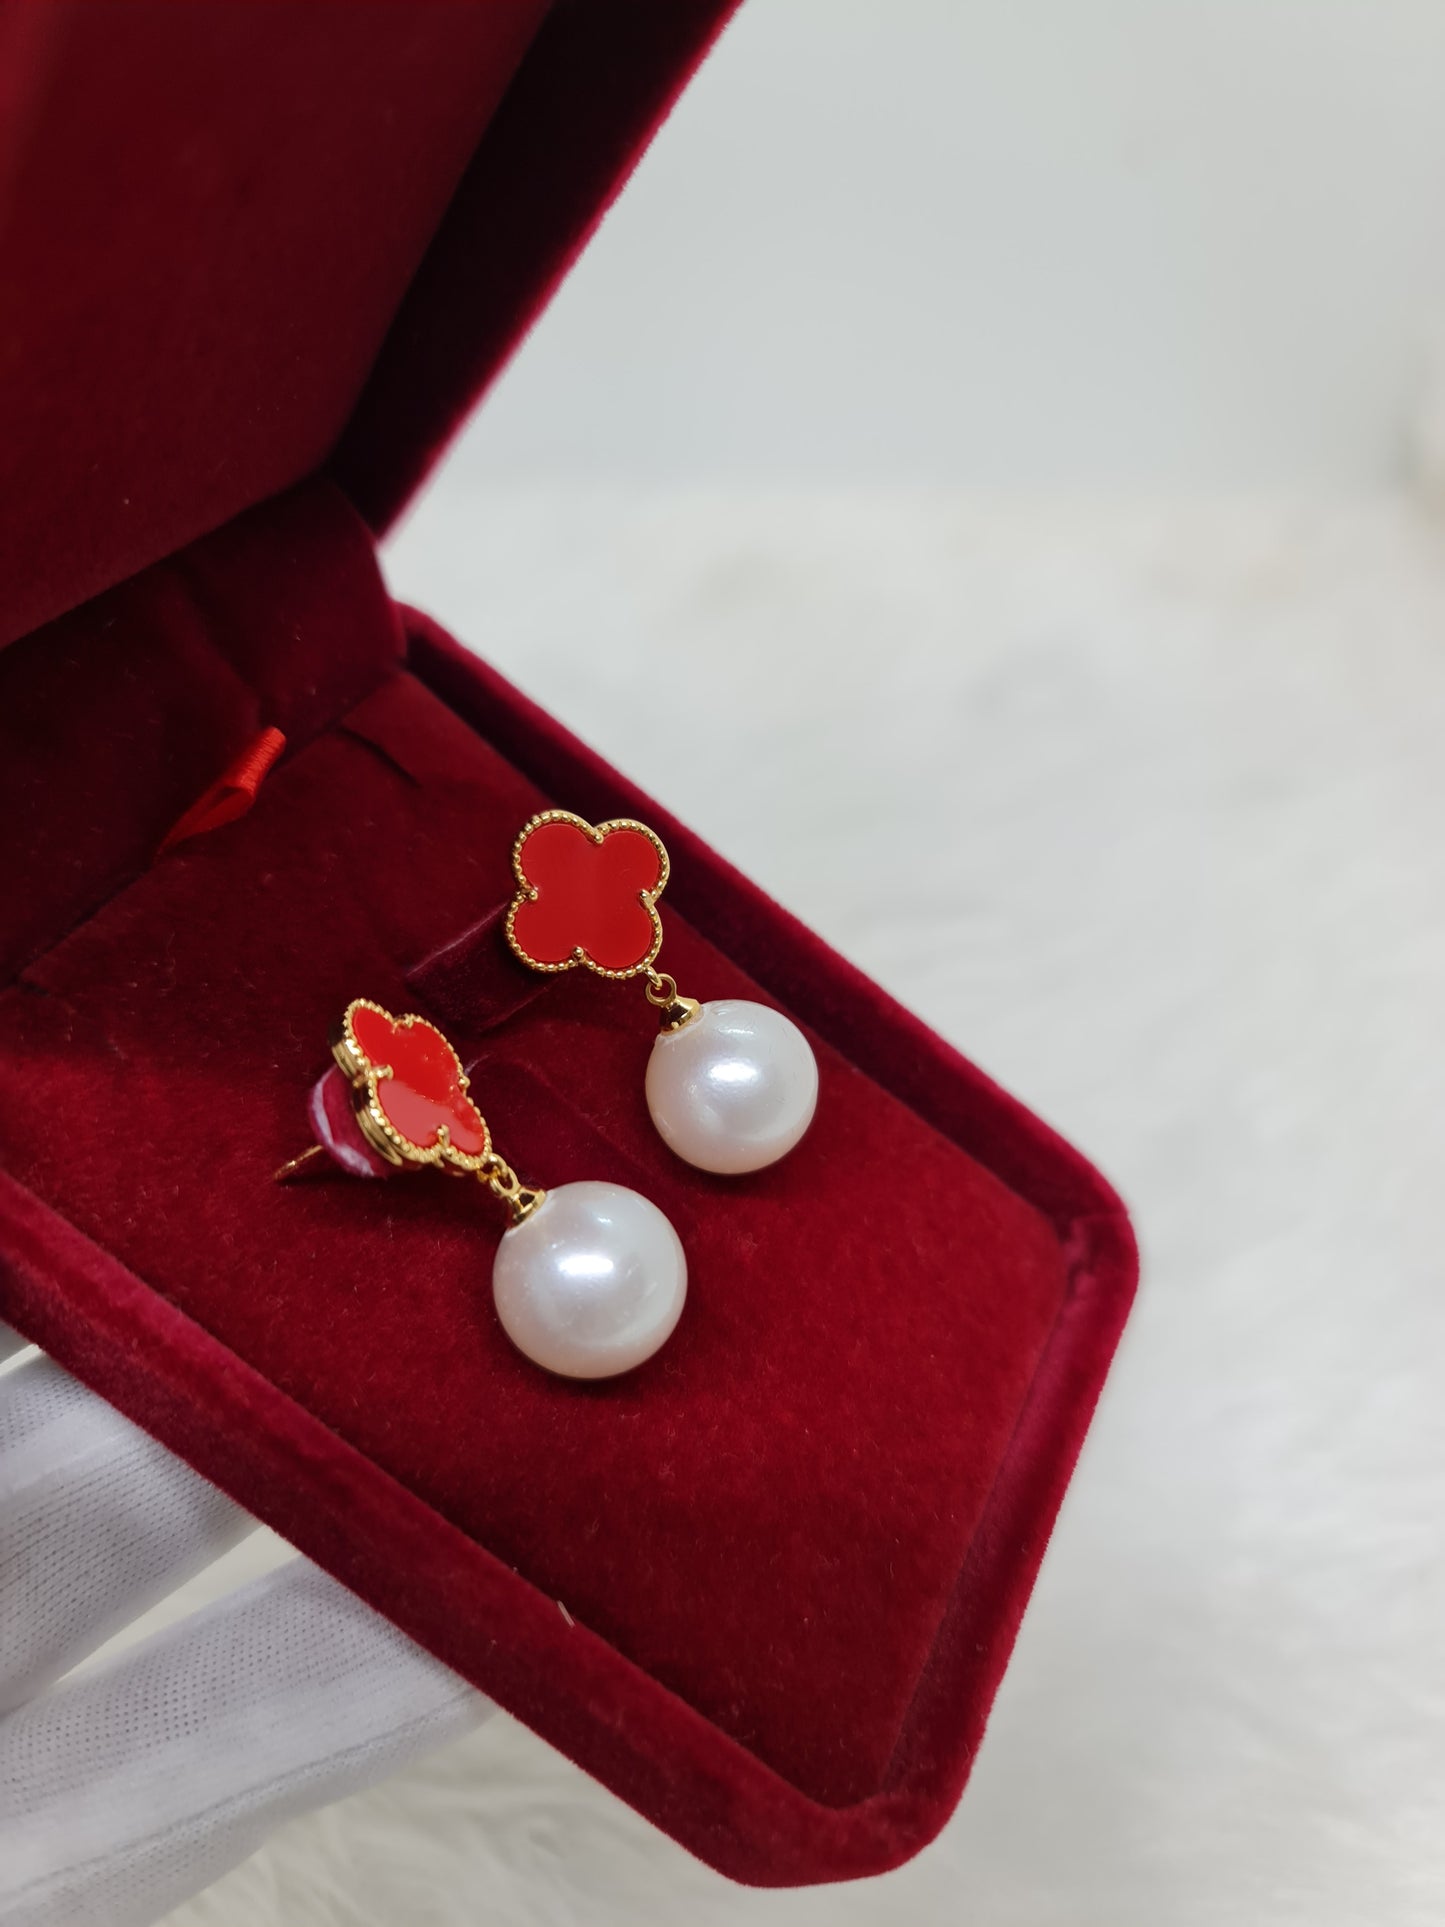 14.5mm - 14.7mm White South Sea Pearls Earrings Gold Plated